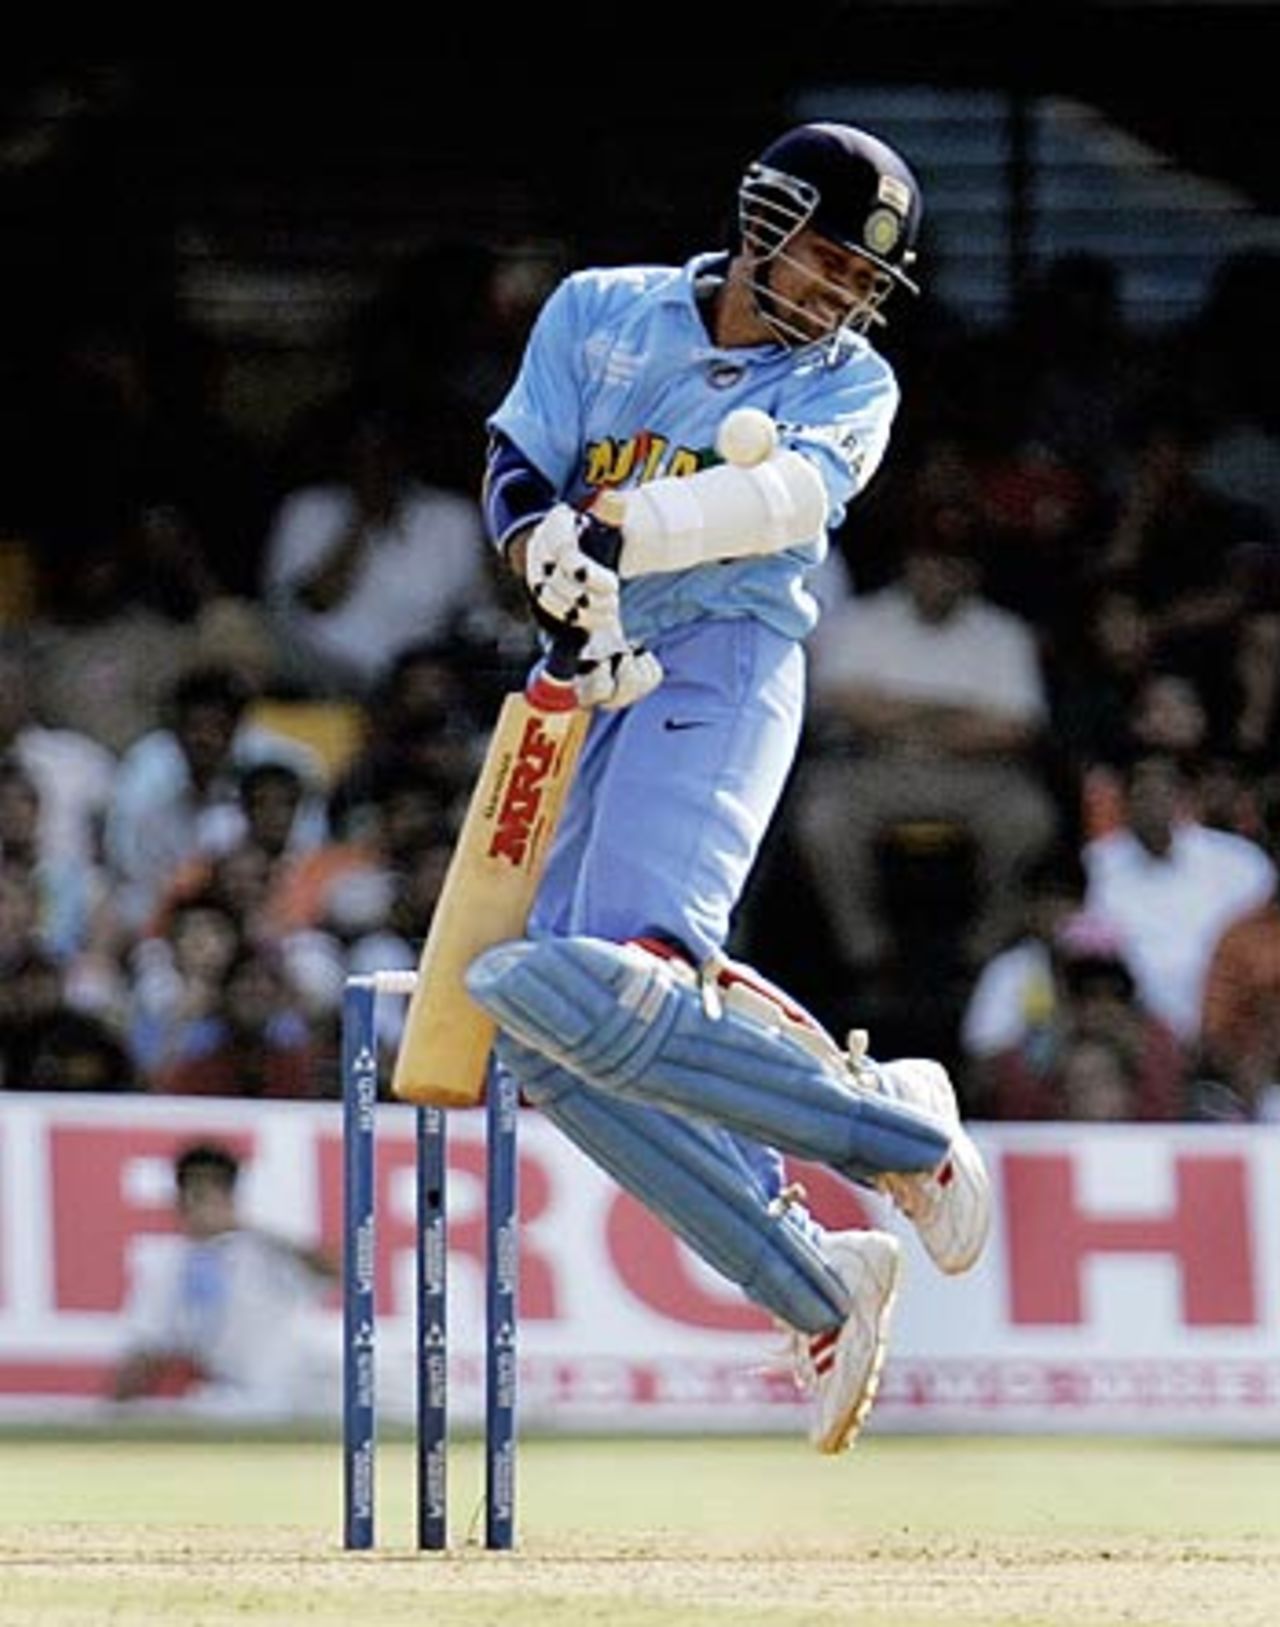 Sachin Tendulkar gets a dose of the short stuff, India v West Indies, 9th match, Champions Trophy, Ahmedabad, October 26, 2006